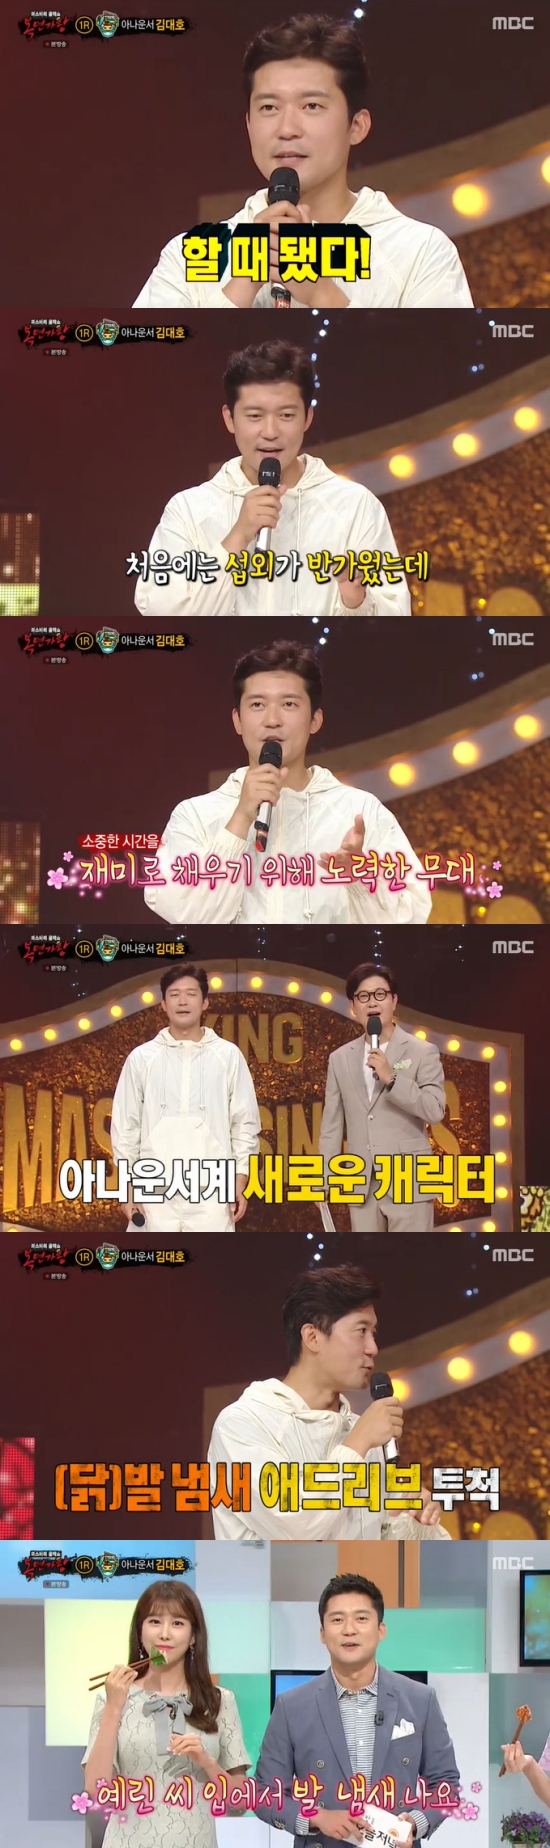 MBC Announcer Kim Dae-ho revealed his thoughts on Freelancers activities.In MBC mask king broadcasted on the 13th, Identity of Caravan, which is a music trip with me, was revealed as Kim Dae-ho Announcer.On this day, Identity of Caravan, which is a music trip with me, turned out to be Kim Dae-ho Announcer, and Kim Seong-joo said,I wonder if you expected to come from mask king. Kim Dae-ho Announcer said, Yes, I thought it was time to do it. I thought I should do it once, but I was afraid to come.I do not like Song as well as singers, and I do not have a lot of talent, so I tried to fill this precious time with fun. Kim Seong-joo said, It is a new character of Announcer system. It is loved as a free soul enough to be called Announcer system Gian 84.When I was working, I wondered, You are a little strange.Kim Dae-ho Announcer said, At first, I thought I did it even if I greeted him because he was not a person who approached me personally.Thats why I get Misunderstood for Whats wrong with him? And The Tiger: An Old Hunters Tale at the dinner. What are you doing this evening?The Tiger: An Old Hunters Tale. How about a cup of coffee?I said, I have water. Kim Seong-joo said, Its broadcast on Sundays (Mask King), but recording is on weekdays. There is a live broadcast in the evening.Kim Dae-ho Announcer said, I think Chayerin Announcer ate a chicken breast in a live broadcast in the studio, and I thought it would be fun, so when Chayerin made a comment, it suddenly smelled like chicken wings.I did not smell my feet, he said. The crew made eye contact with Kim Dae-hos live broadcast video.In particular, Park Chan-min asked, Do you think you will be free in the future? Kim Dae-ho Announcer said, Those who are sure to know are asking such questions.Kim Dae-ho Announcer said, I ask a lot of questions, and I think that the reason why I am busy here is because I am surprised to see Announcer work.I do not want to Misunderstood the great benefits of Announcers title itself, but I want to show you another aspect. Furthermore, Kim Dae-ho Announcer said of his future plans, When I used a mask, another me came out. I will share many images with you and enjoy broadcasting while having a variety of experiences.Photo = MBC broadcast screen